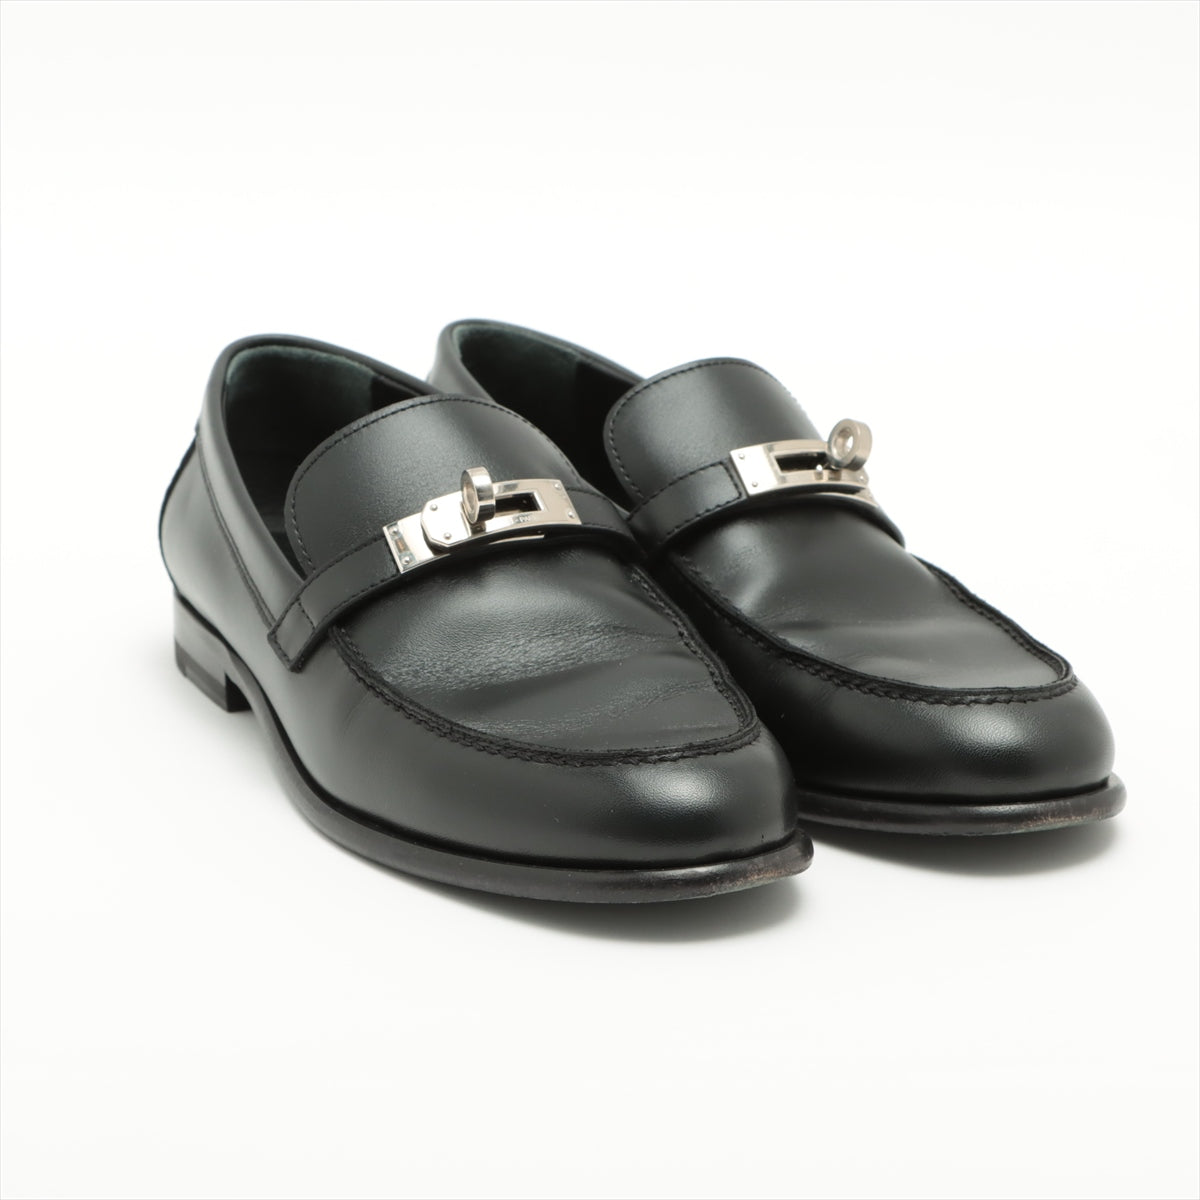 Hermès Kelly Leather Loafer 36 Ladies' Black WS212114Z There is a box